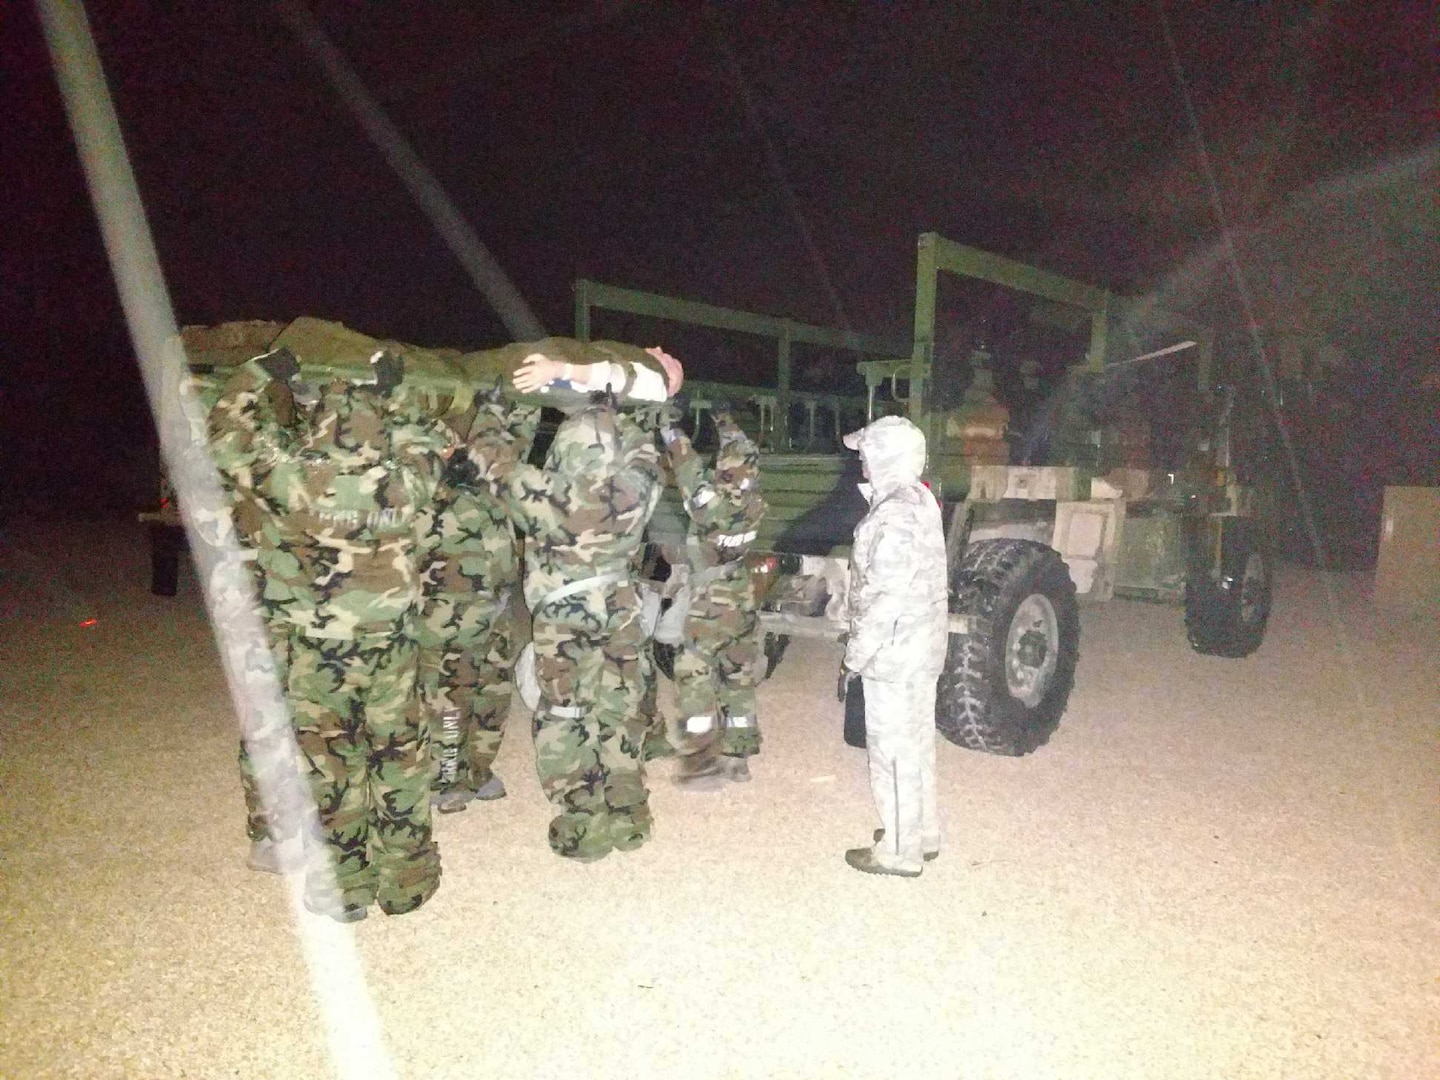 Airmen medics wearing mission oriented protective posture gear load a mannequin on to a transport vehicle during nighttime training at Joint Base San Antonio-Camp Bullis. The training is comprised of scenarios focused on helping Airmen medics understand challenges that might occur during a chemical or biological event.